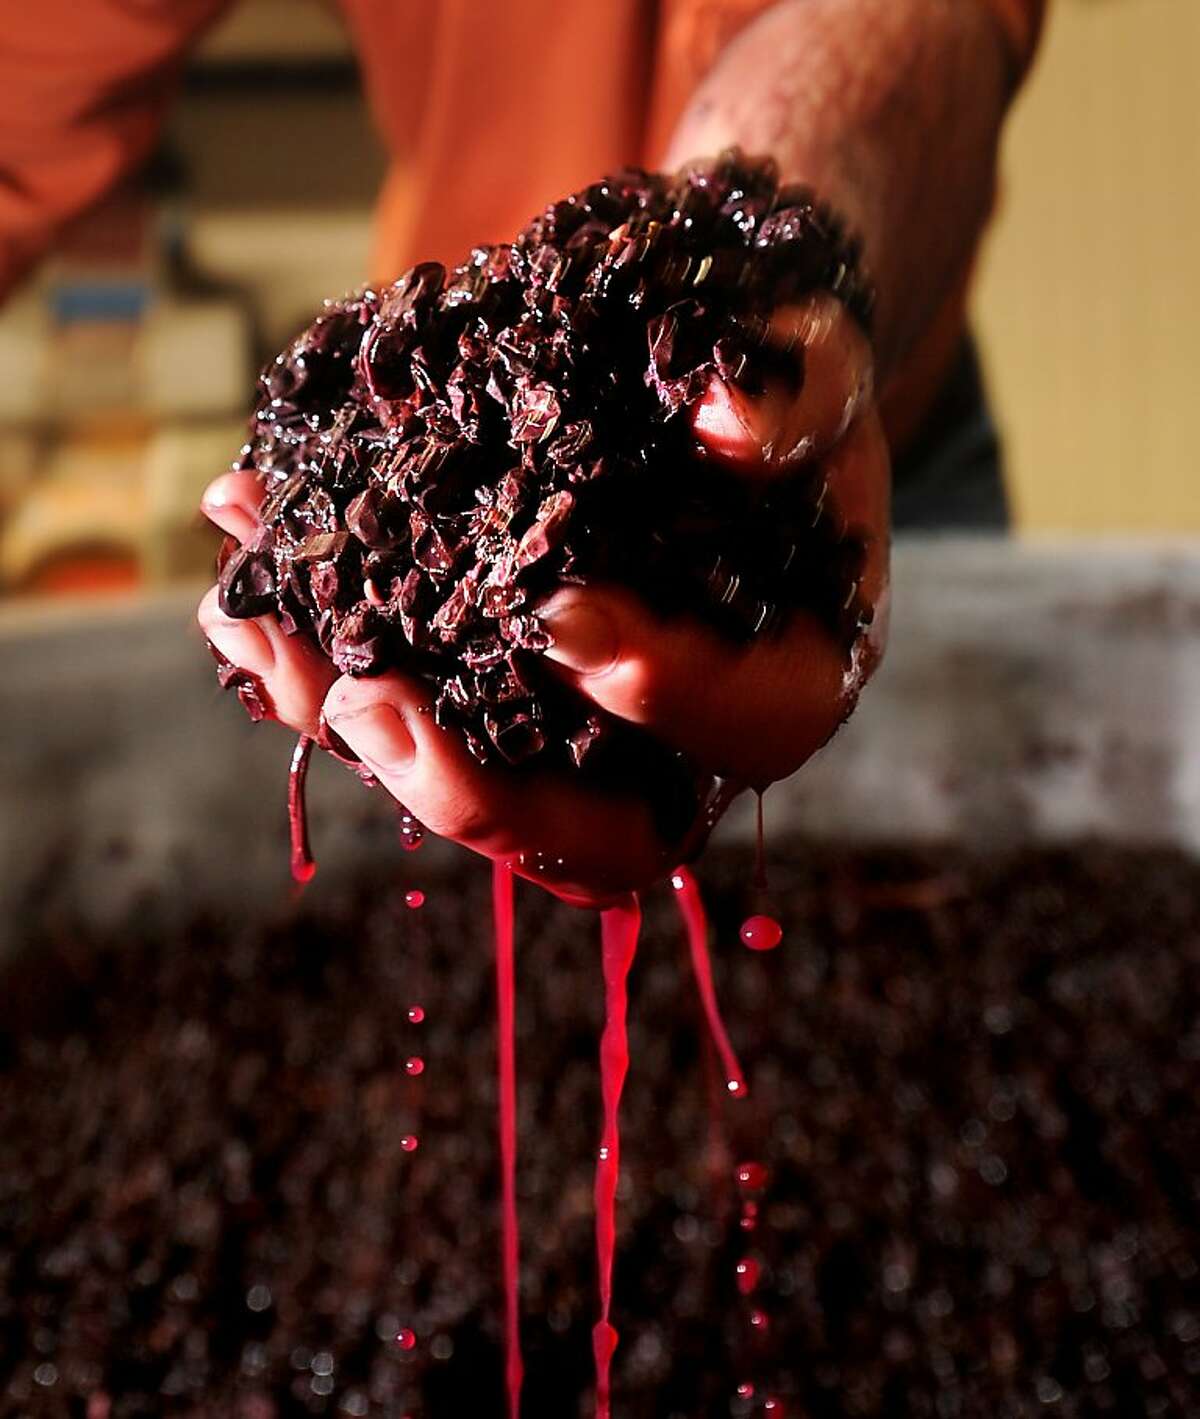 Winemaker Chris Nelson squeezes fermenting grapes at Bluxome Street Winery on Wednesday, Oct. 19, 2011, in San Francisco